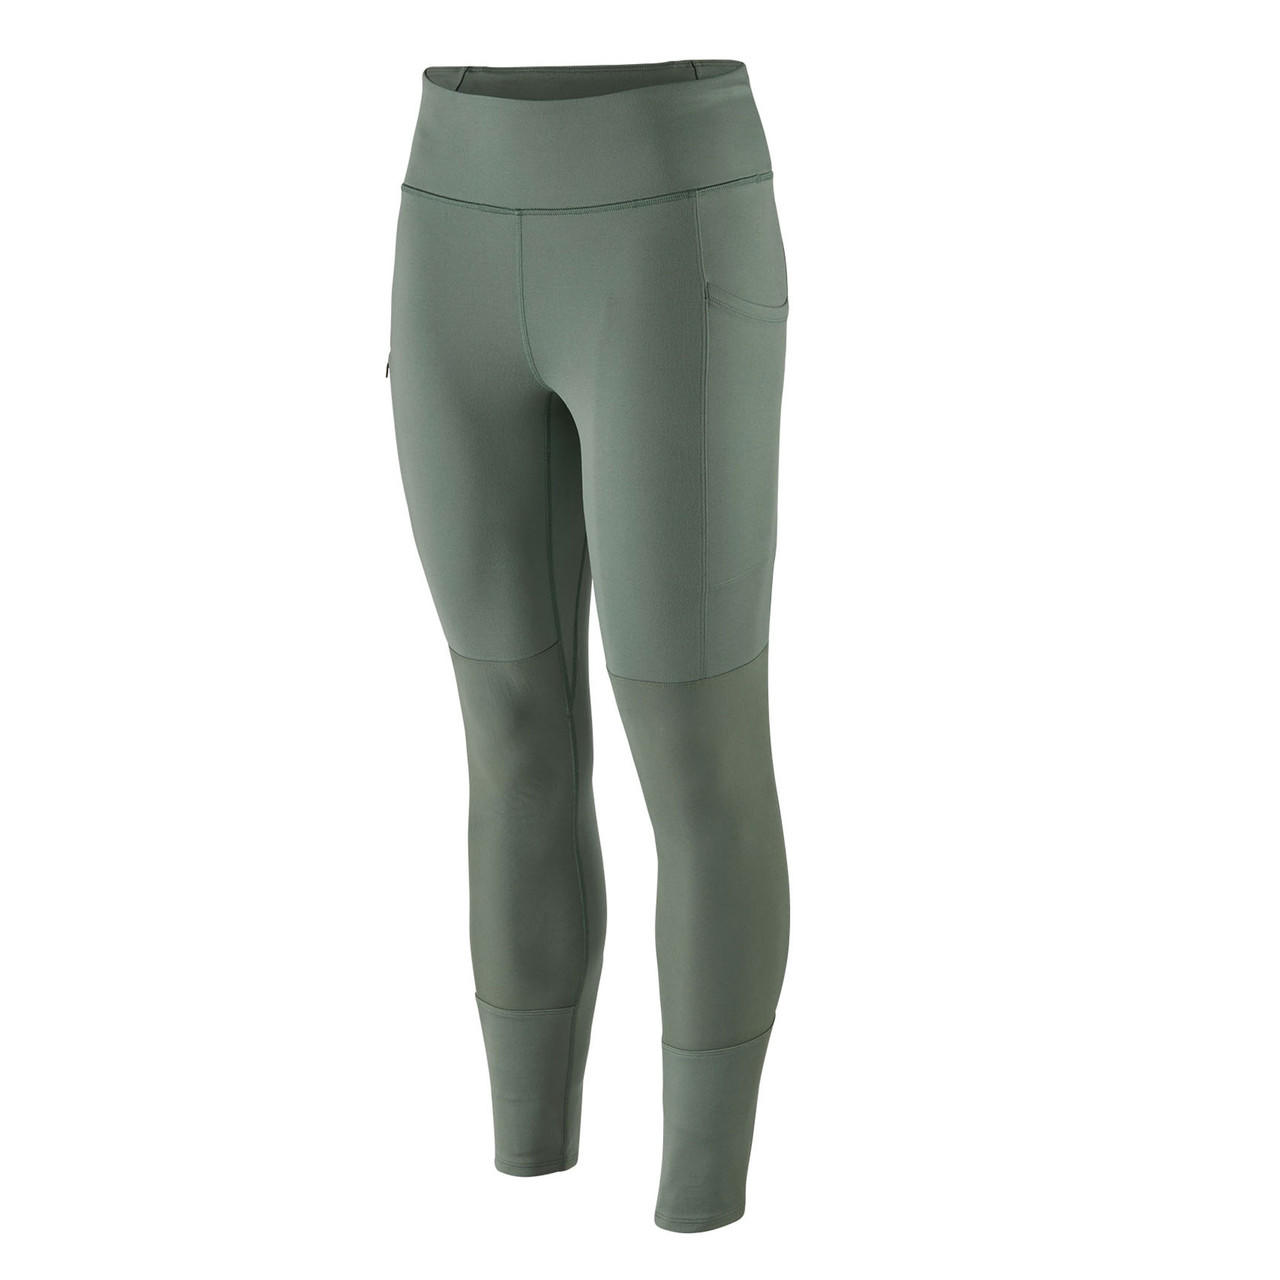 Patagonia Womens Pack Out Tights, UK